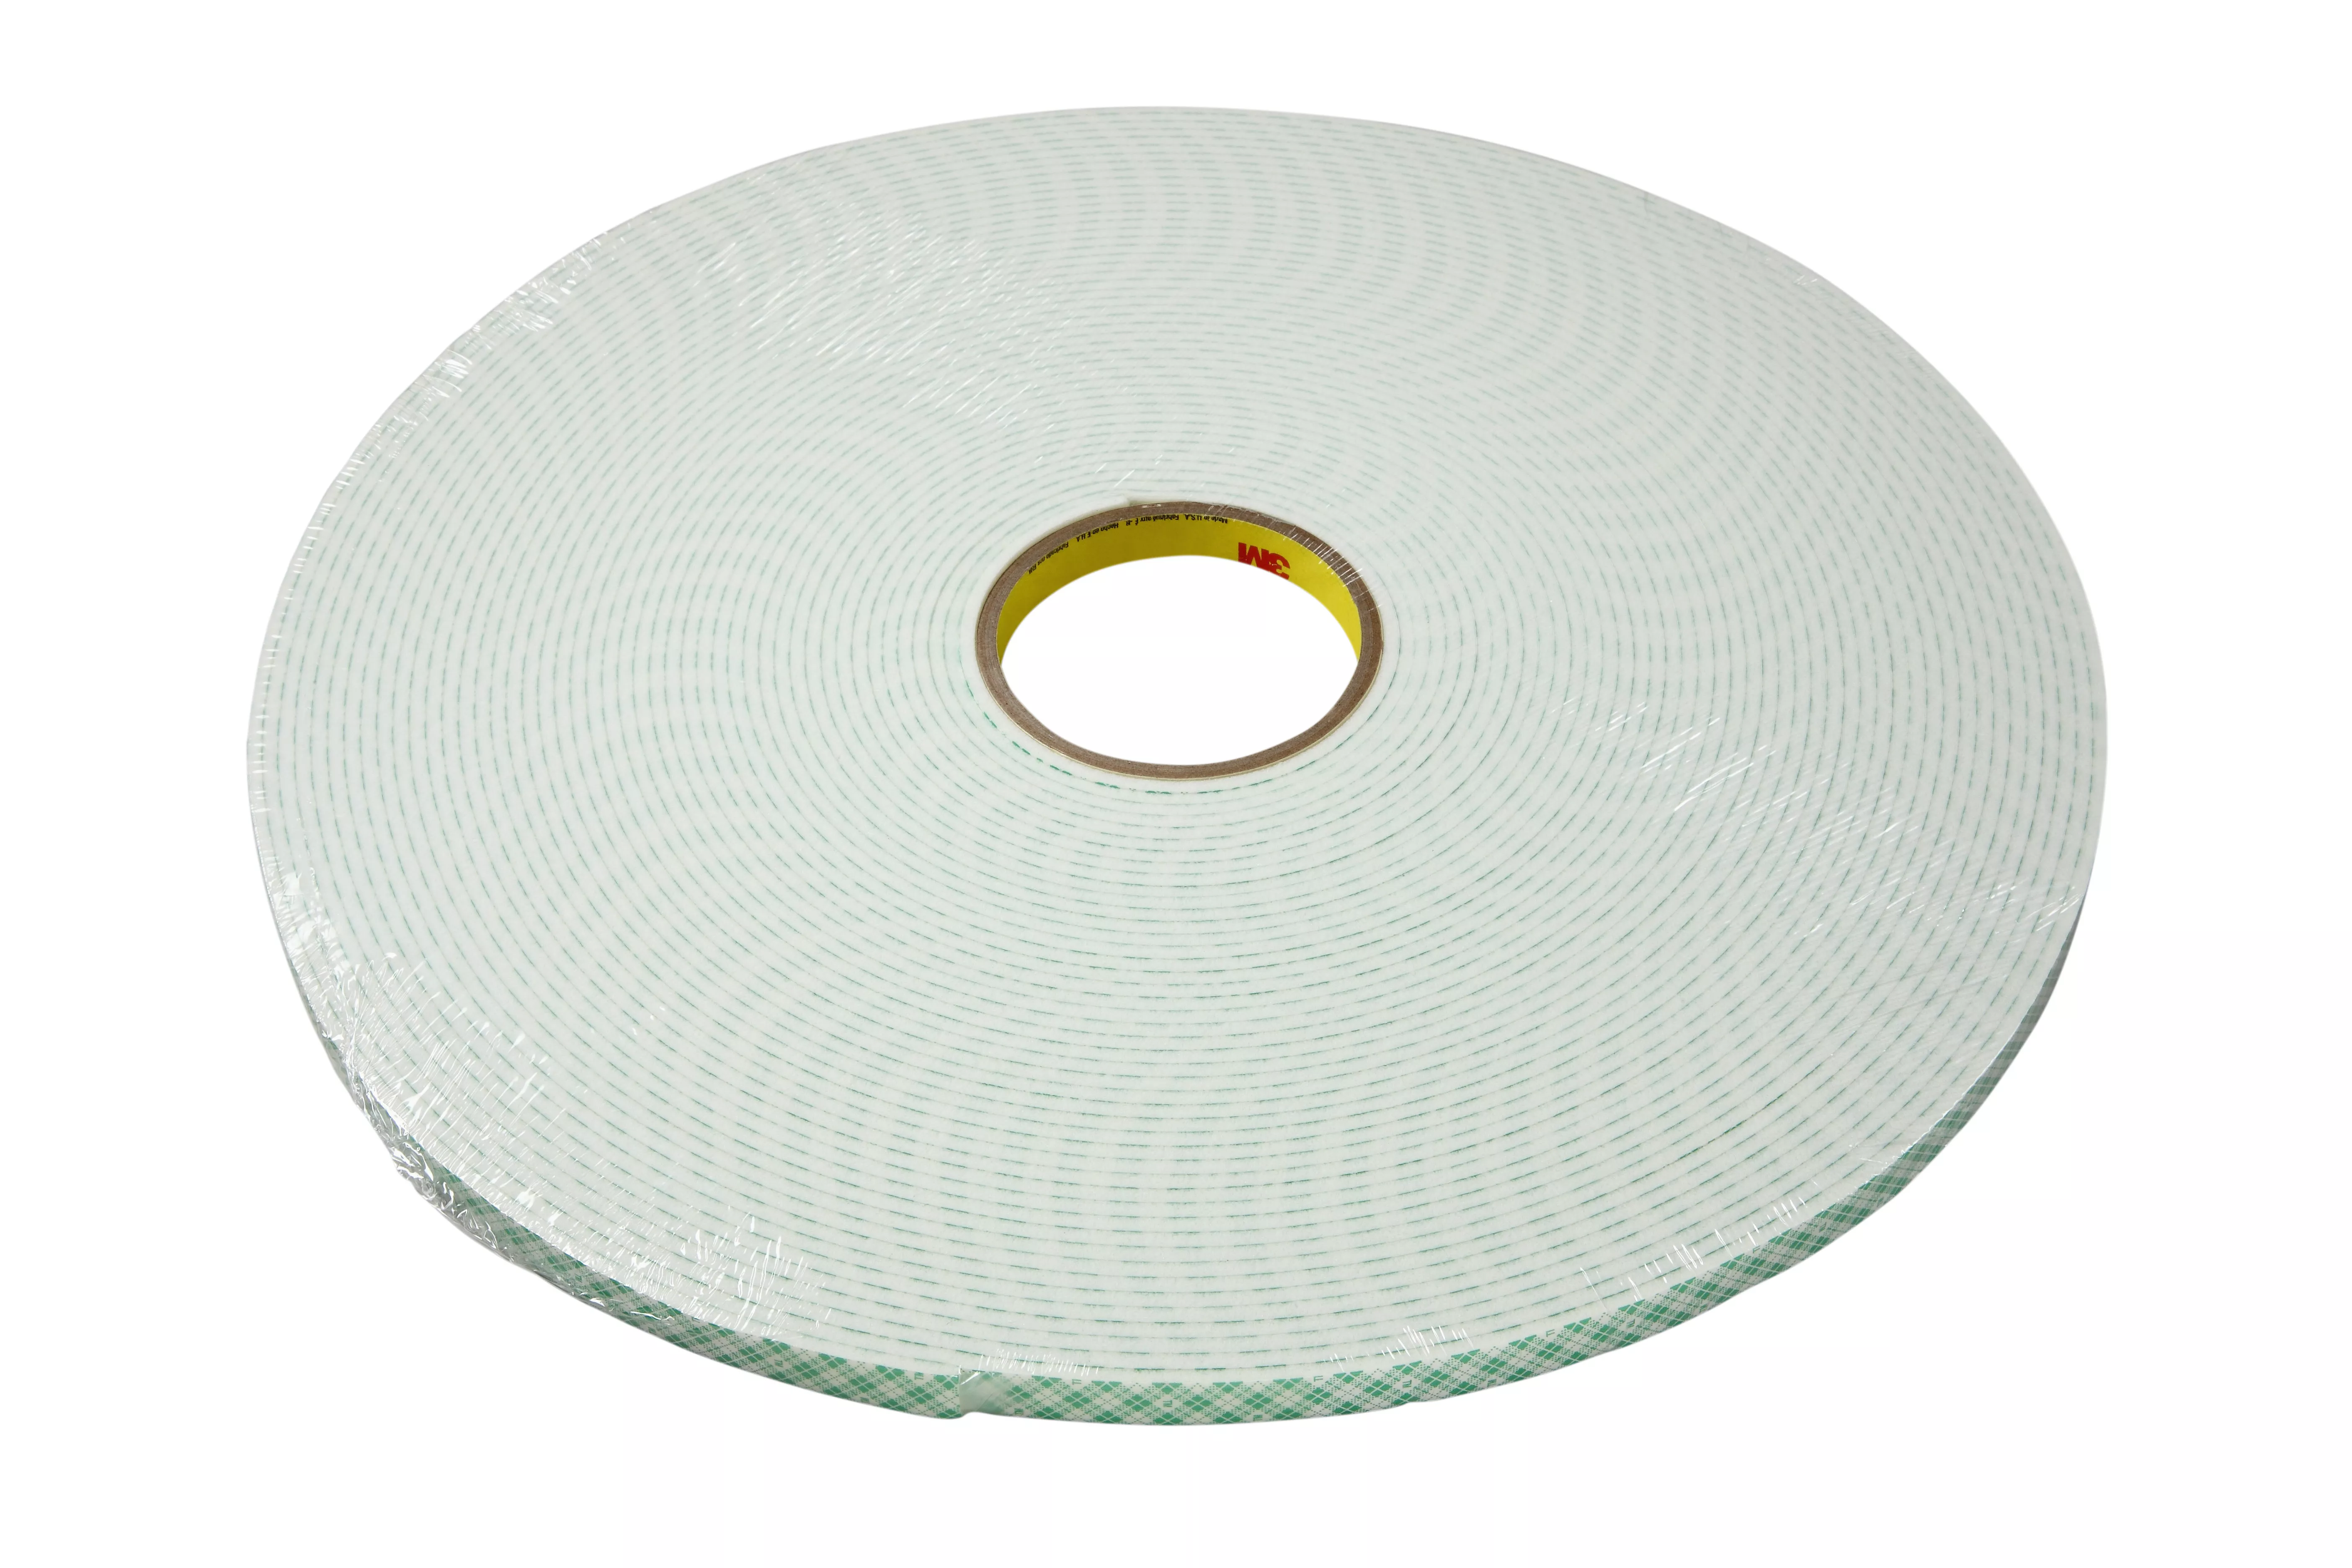 3M™ Double Coated Urethane Foam Tape 4004, Off White, 3 in x 18 yd, 250
mil, 3 Roll/Case